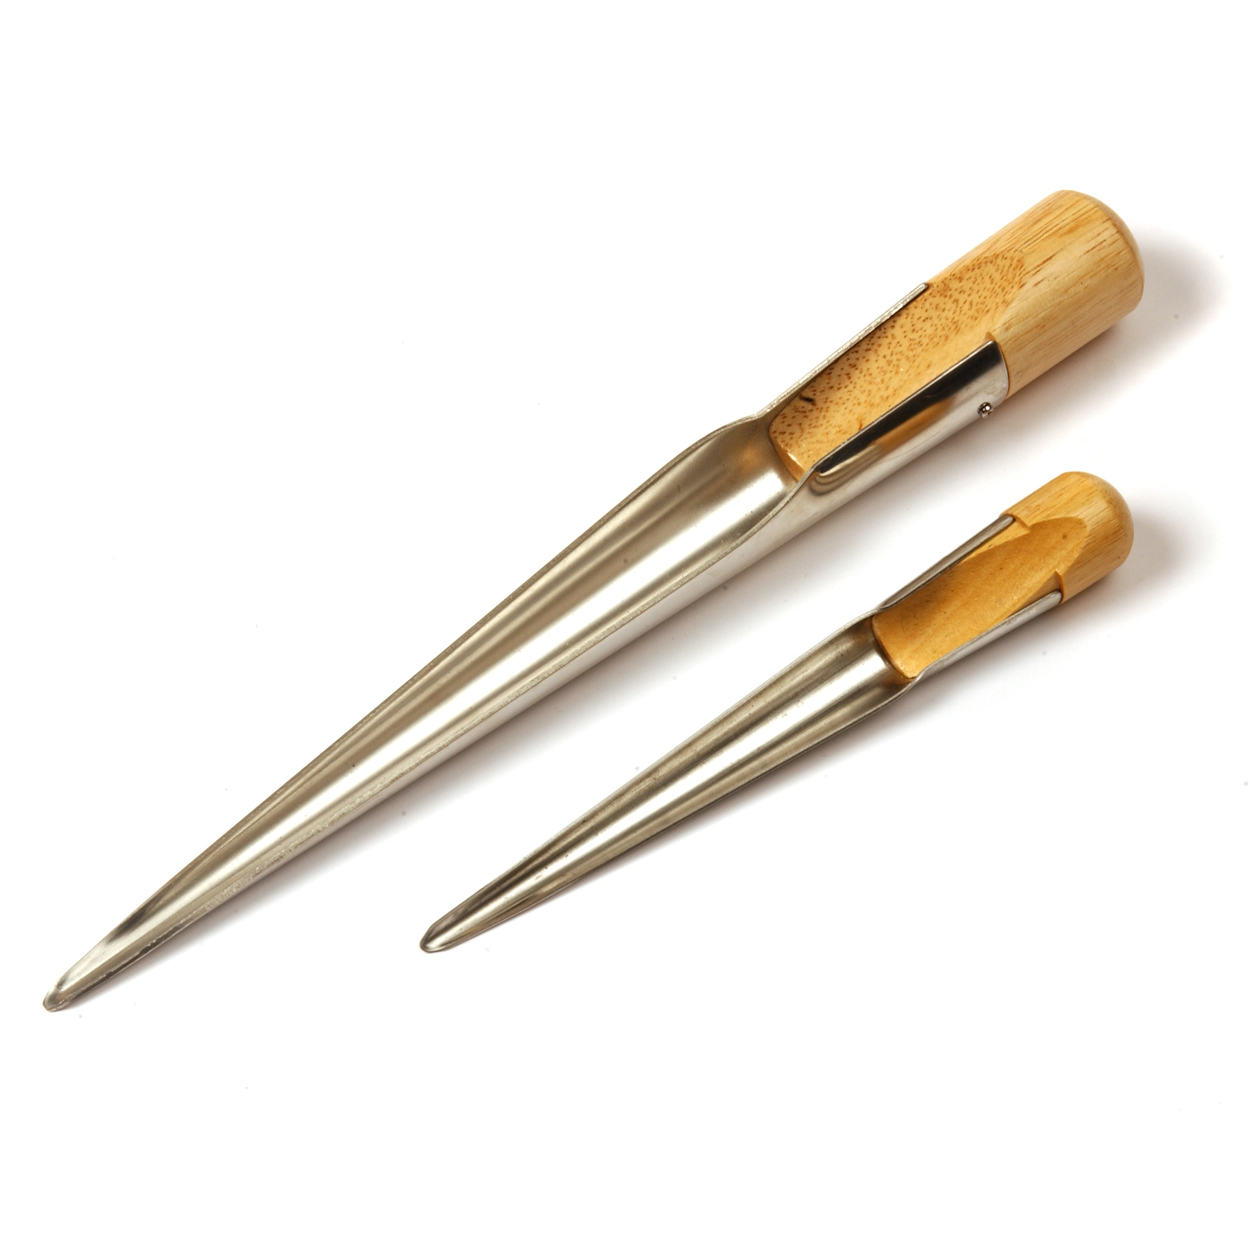 Swedish Fids - Traditional Stainless Steel Fids, Two Sizes to Choose From